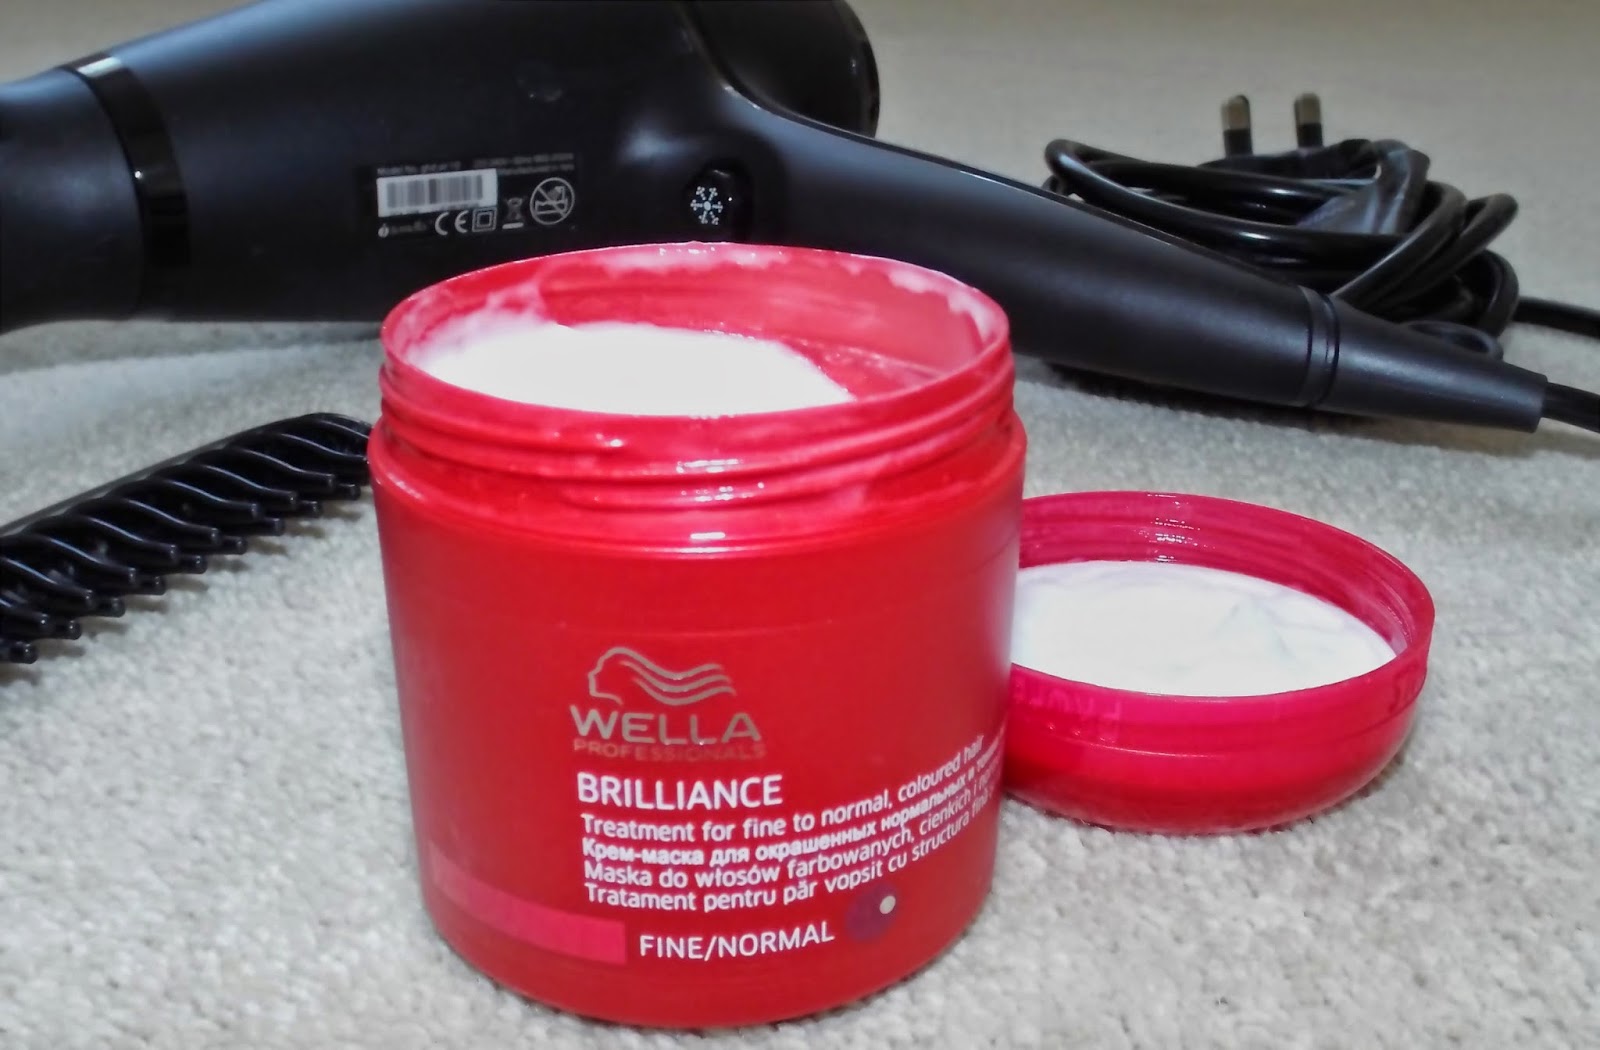 WELLA Brilliance Hair Mask Review